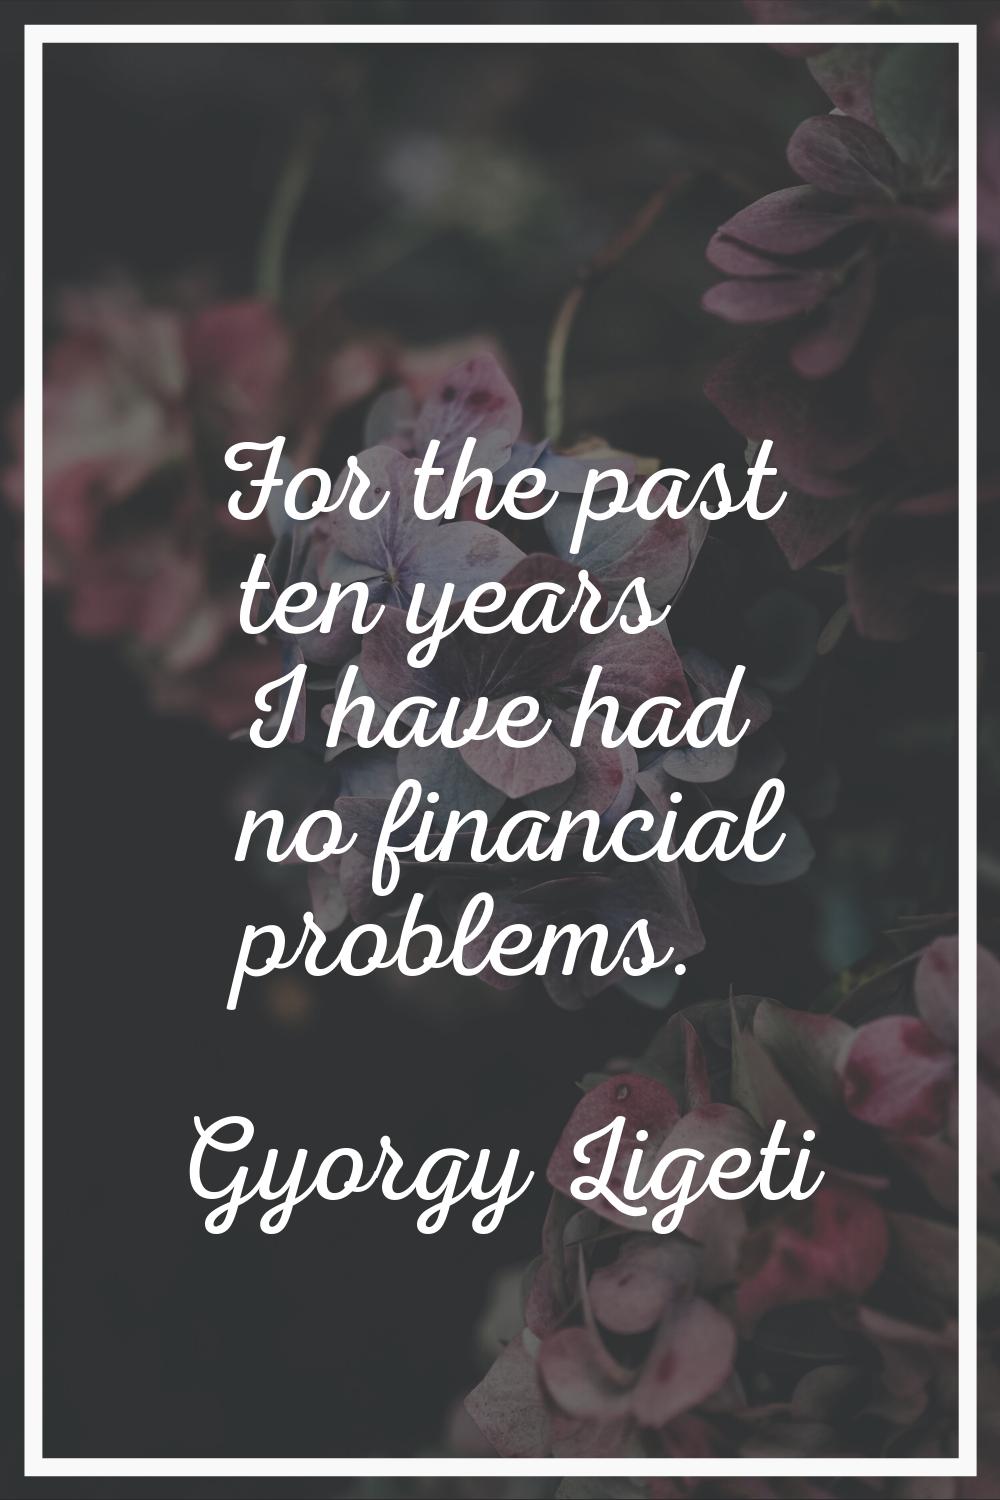 For the past ten years I have had no financial problems.